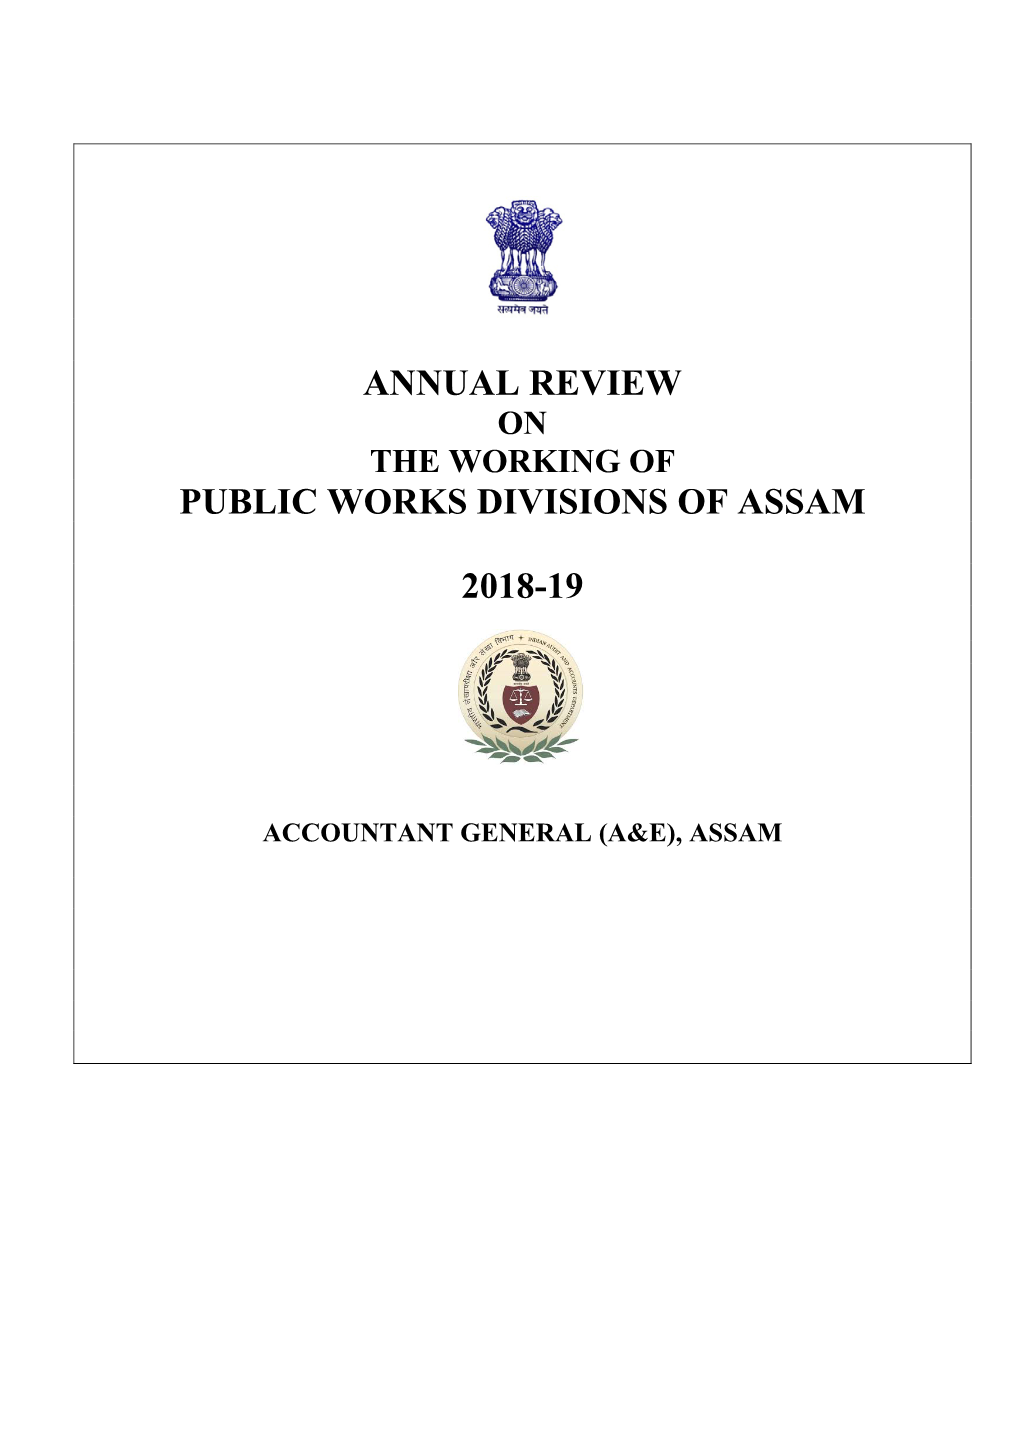 Annual Review Public Works Divisions of Assam 2018-19